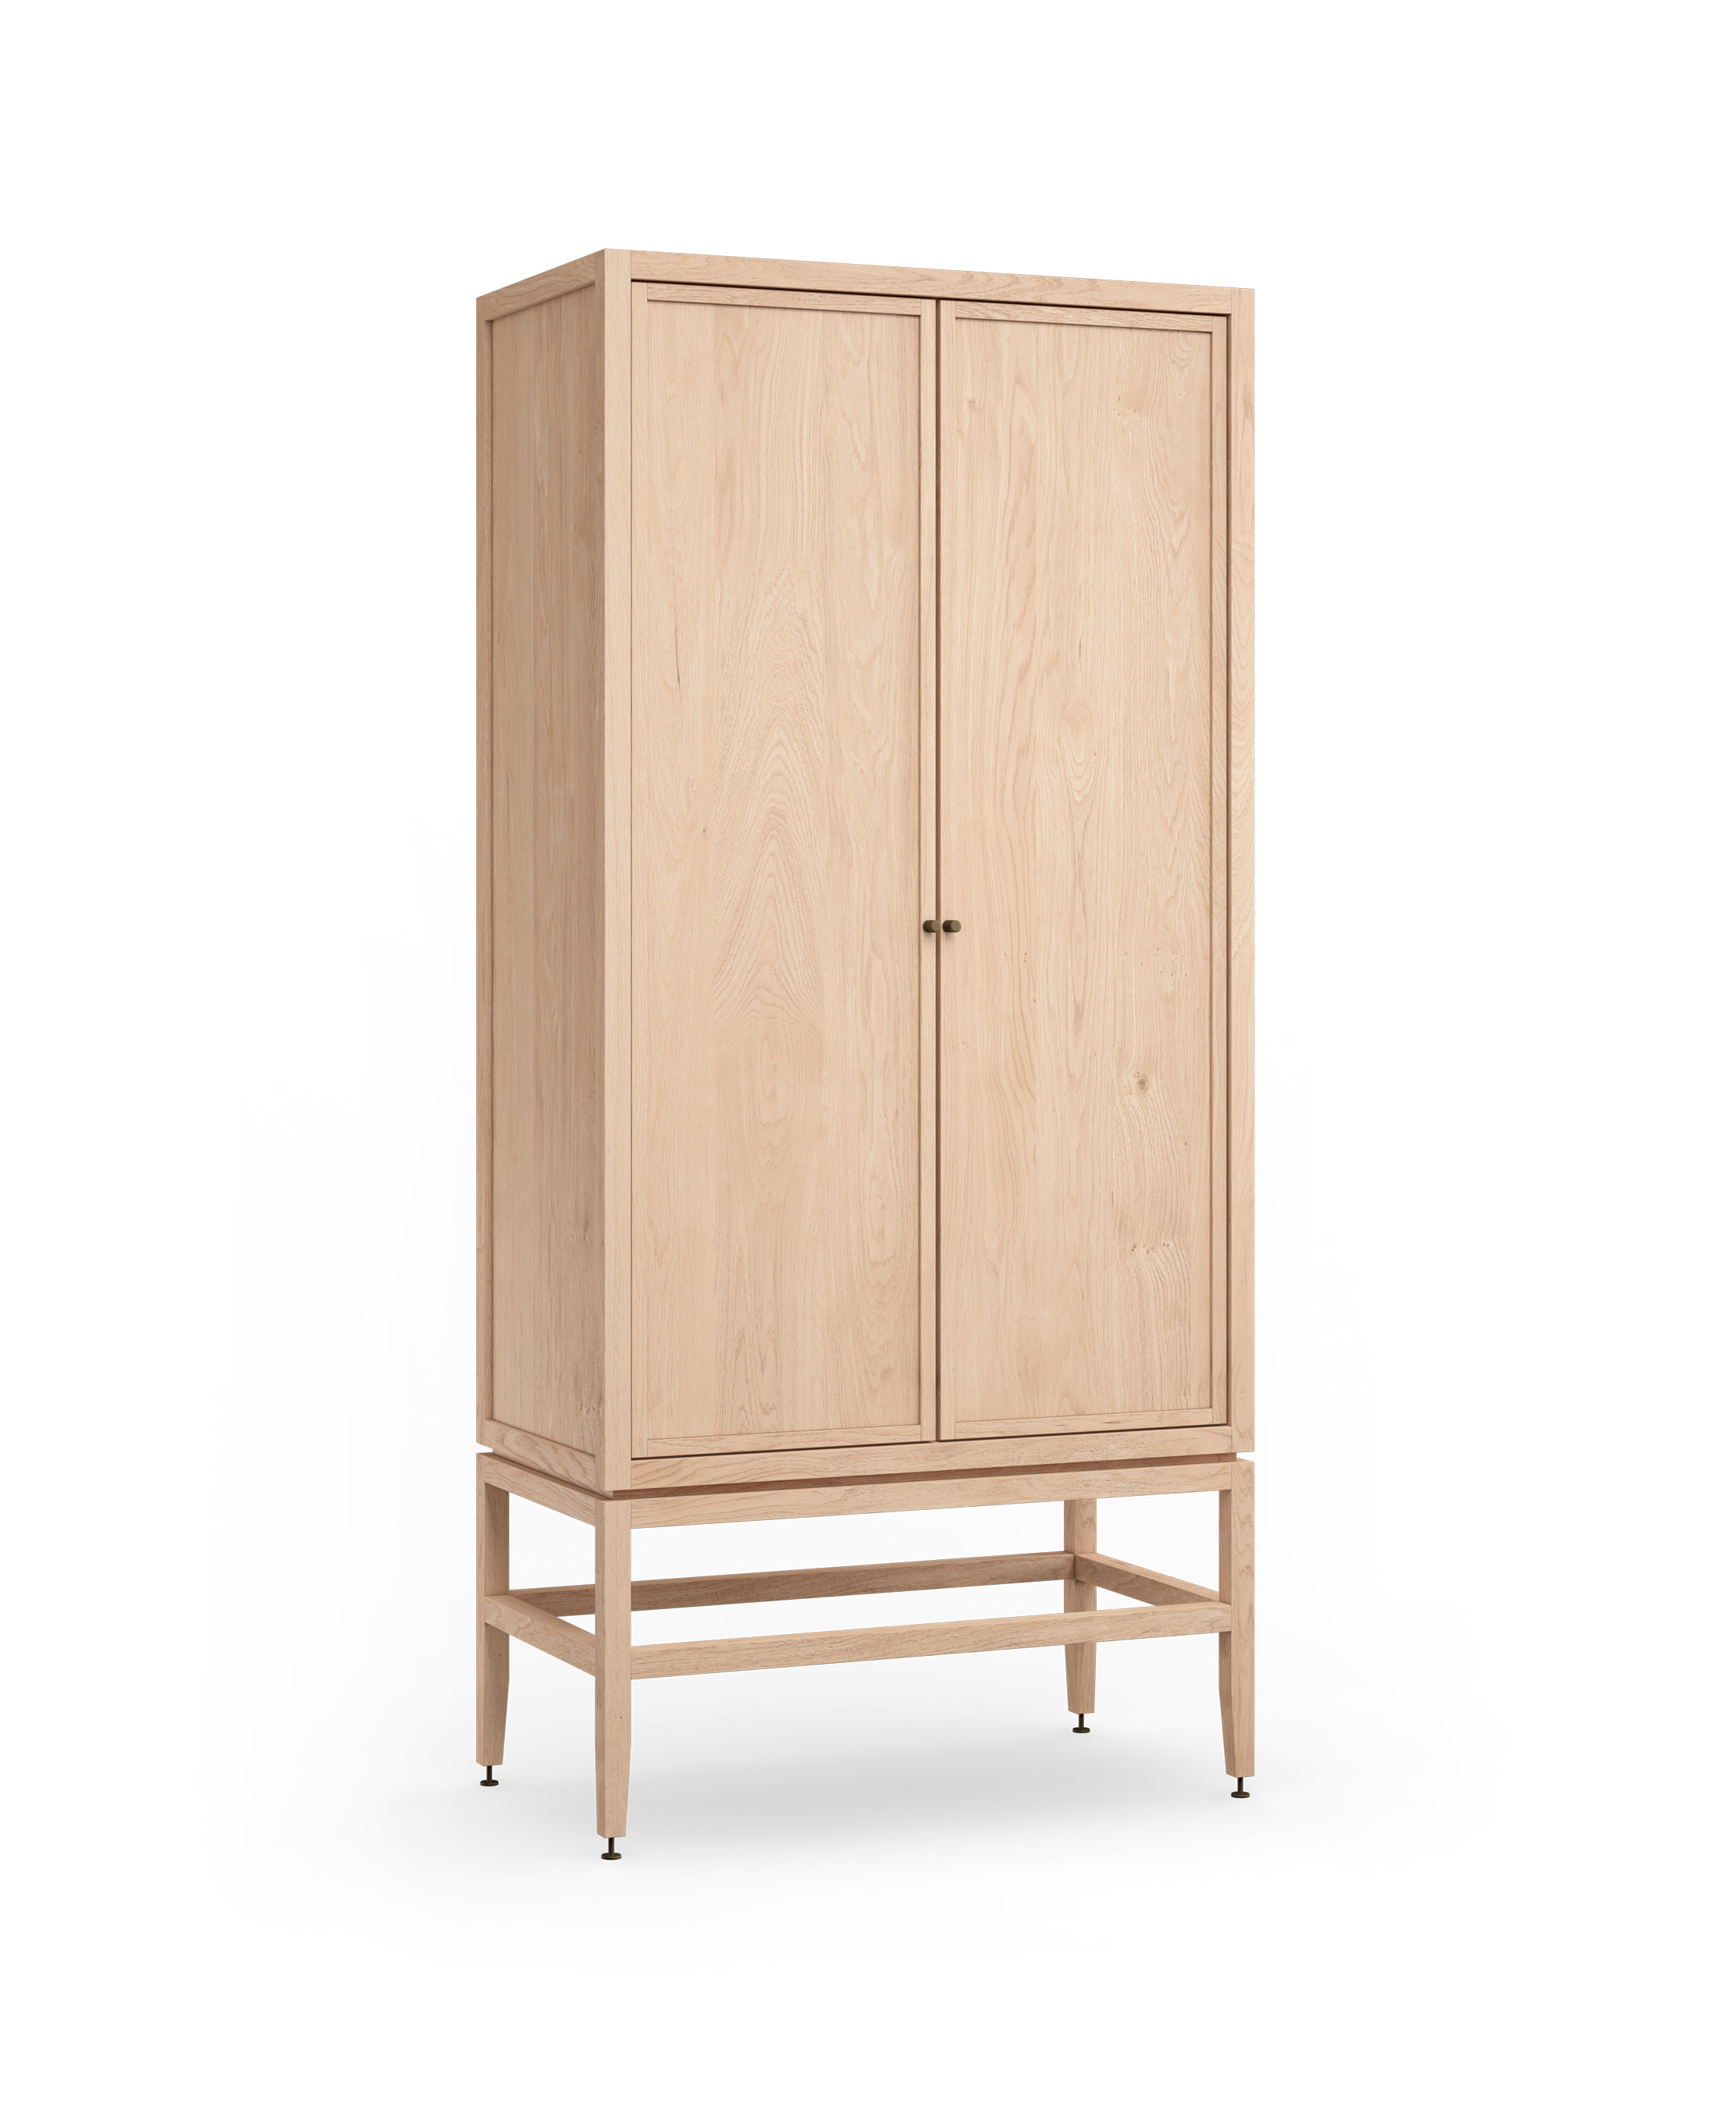 Coquo freestanding armoire in natural oak with wood doors. Can be used as a pantry, buffet, wardrobe, pharmacy.